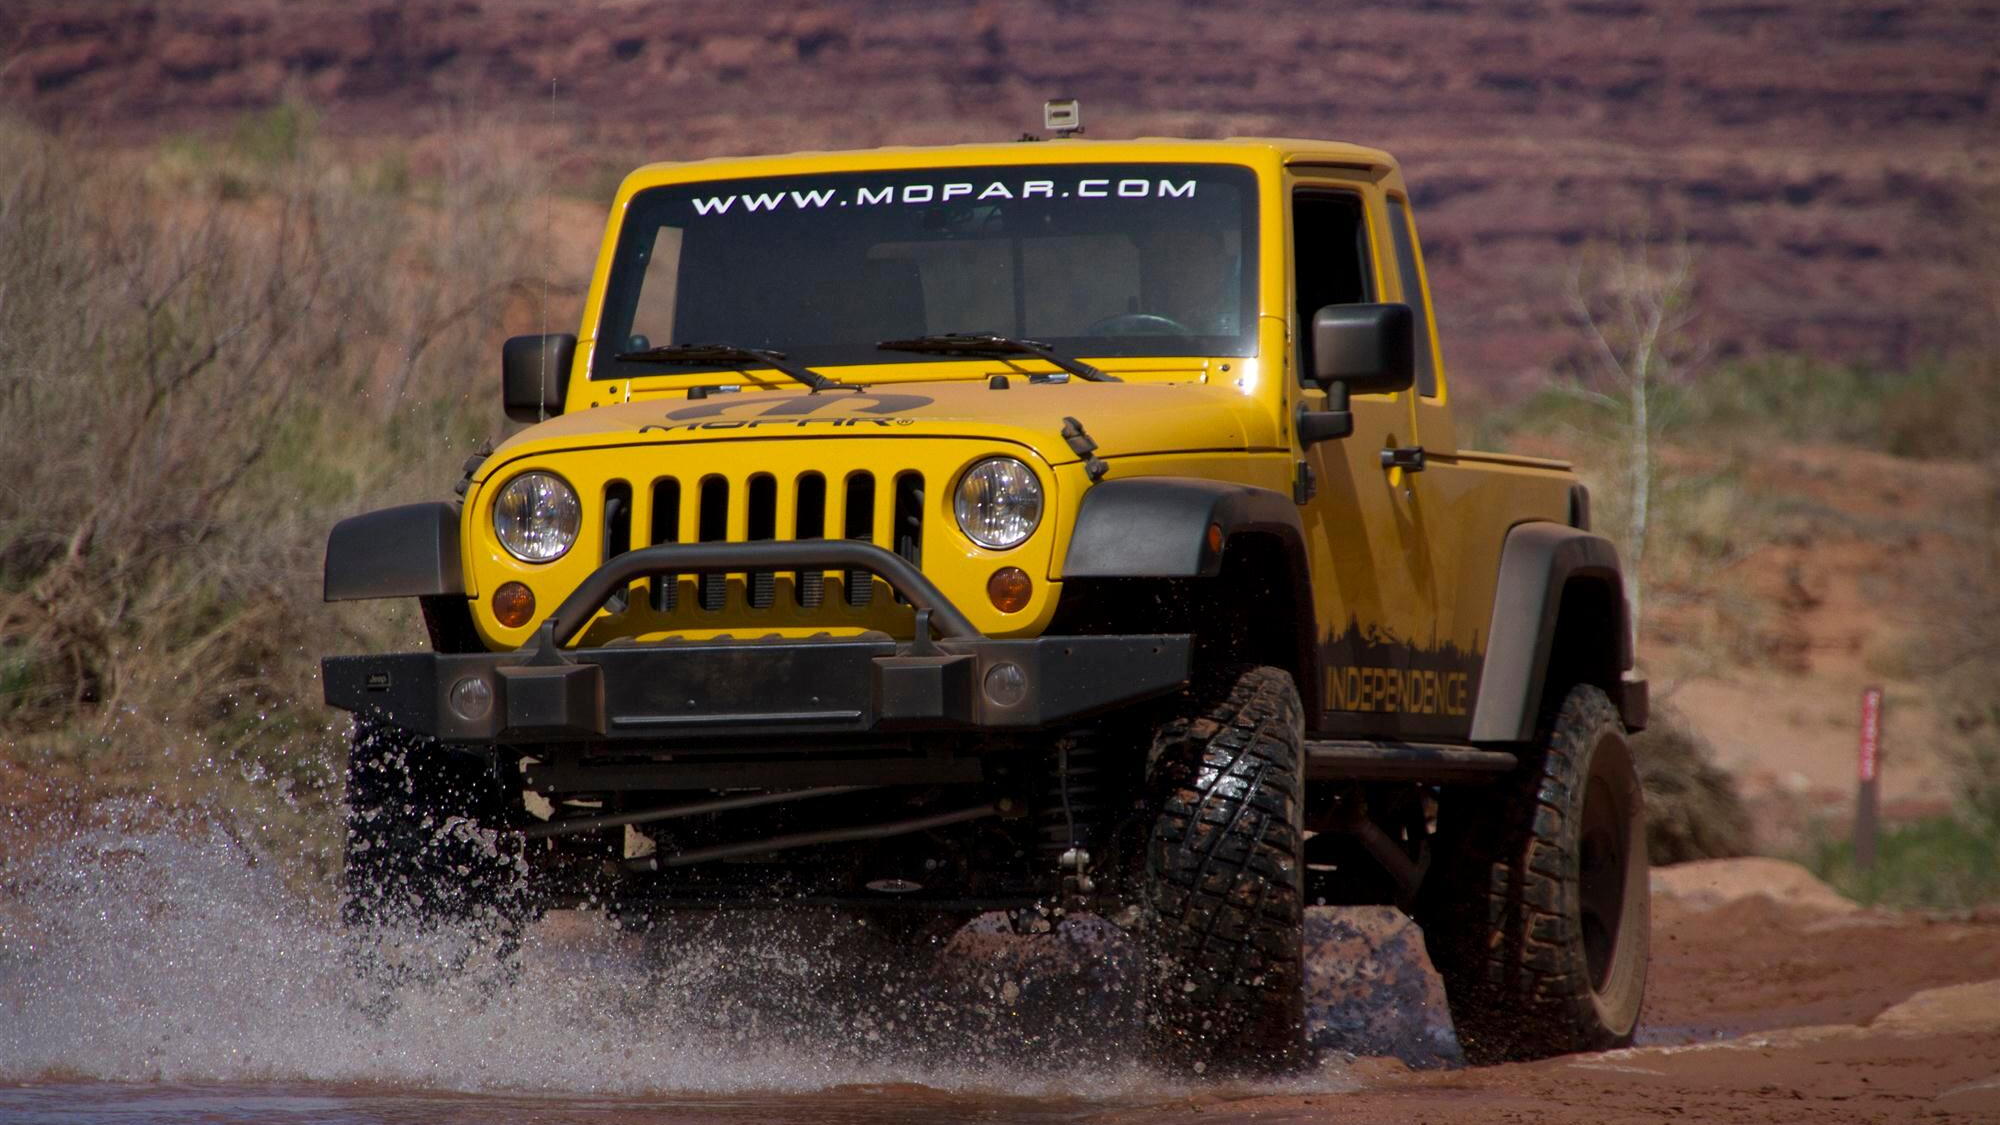 Jeep JK-8 Independence pickup conversion package